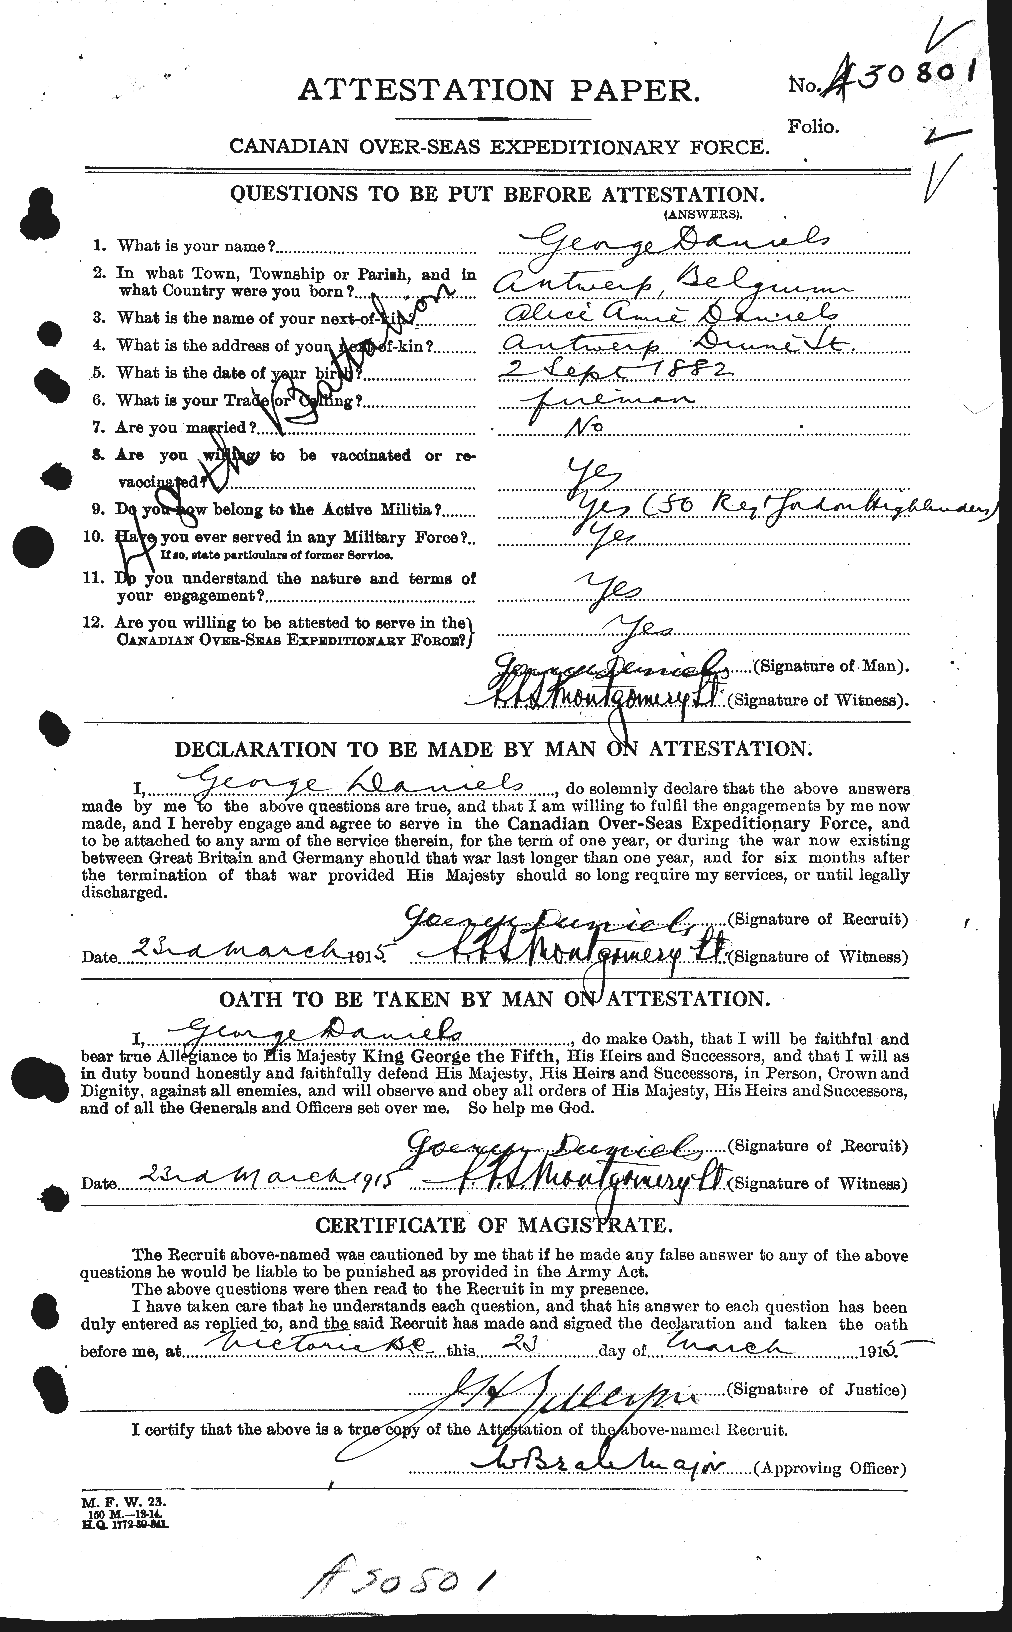 Personnel Records of the First World War - CEF 279599a